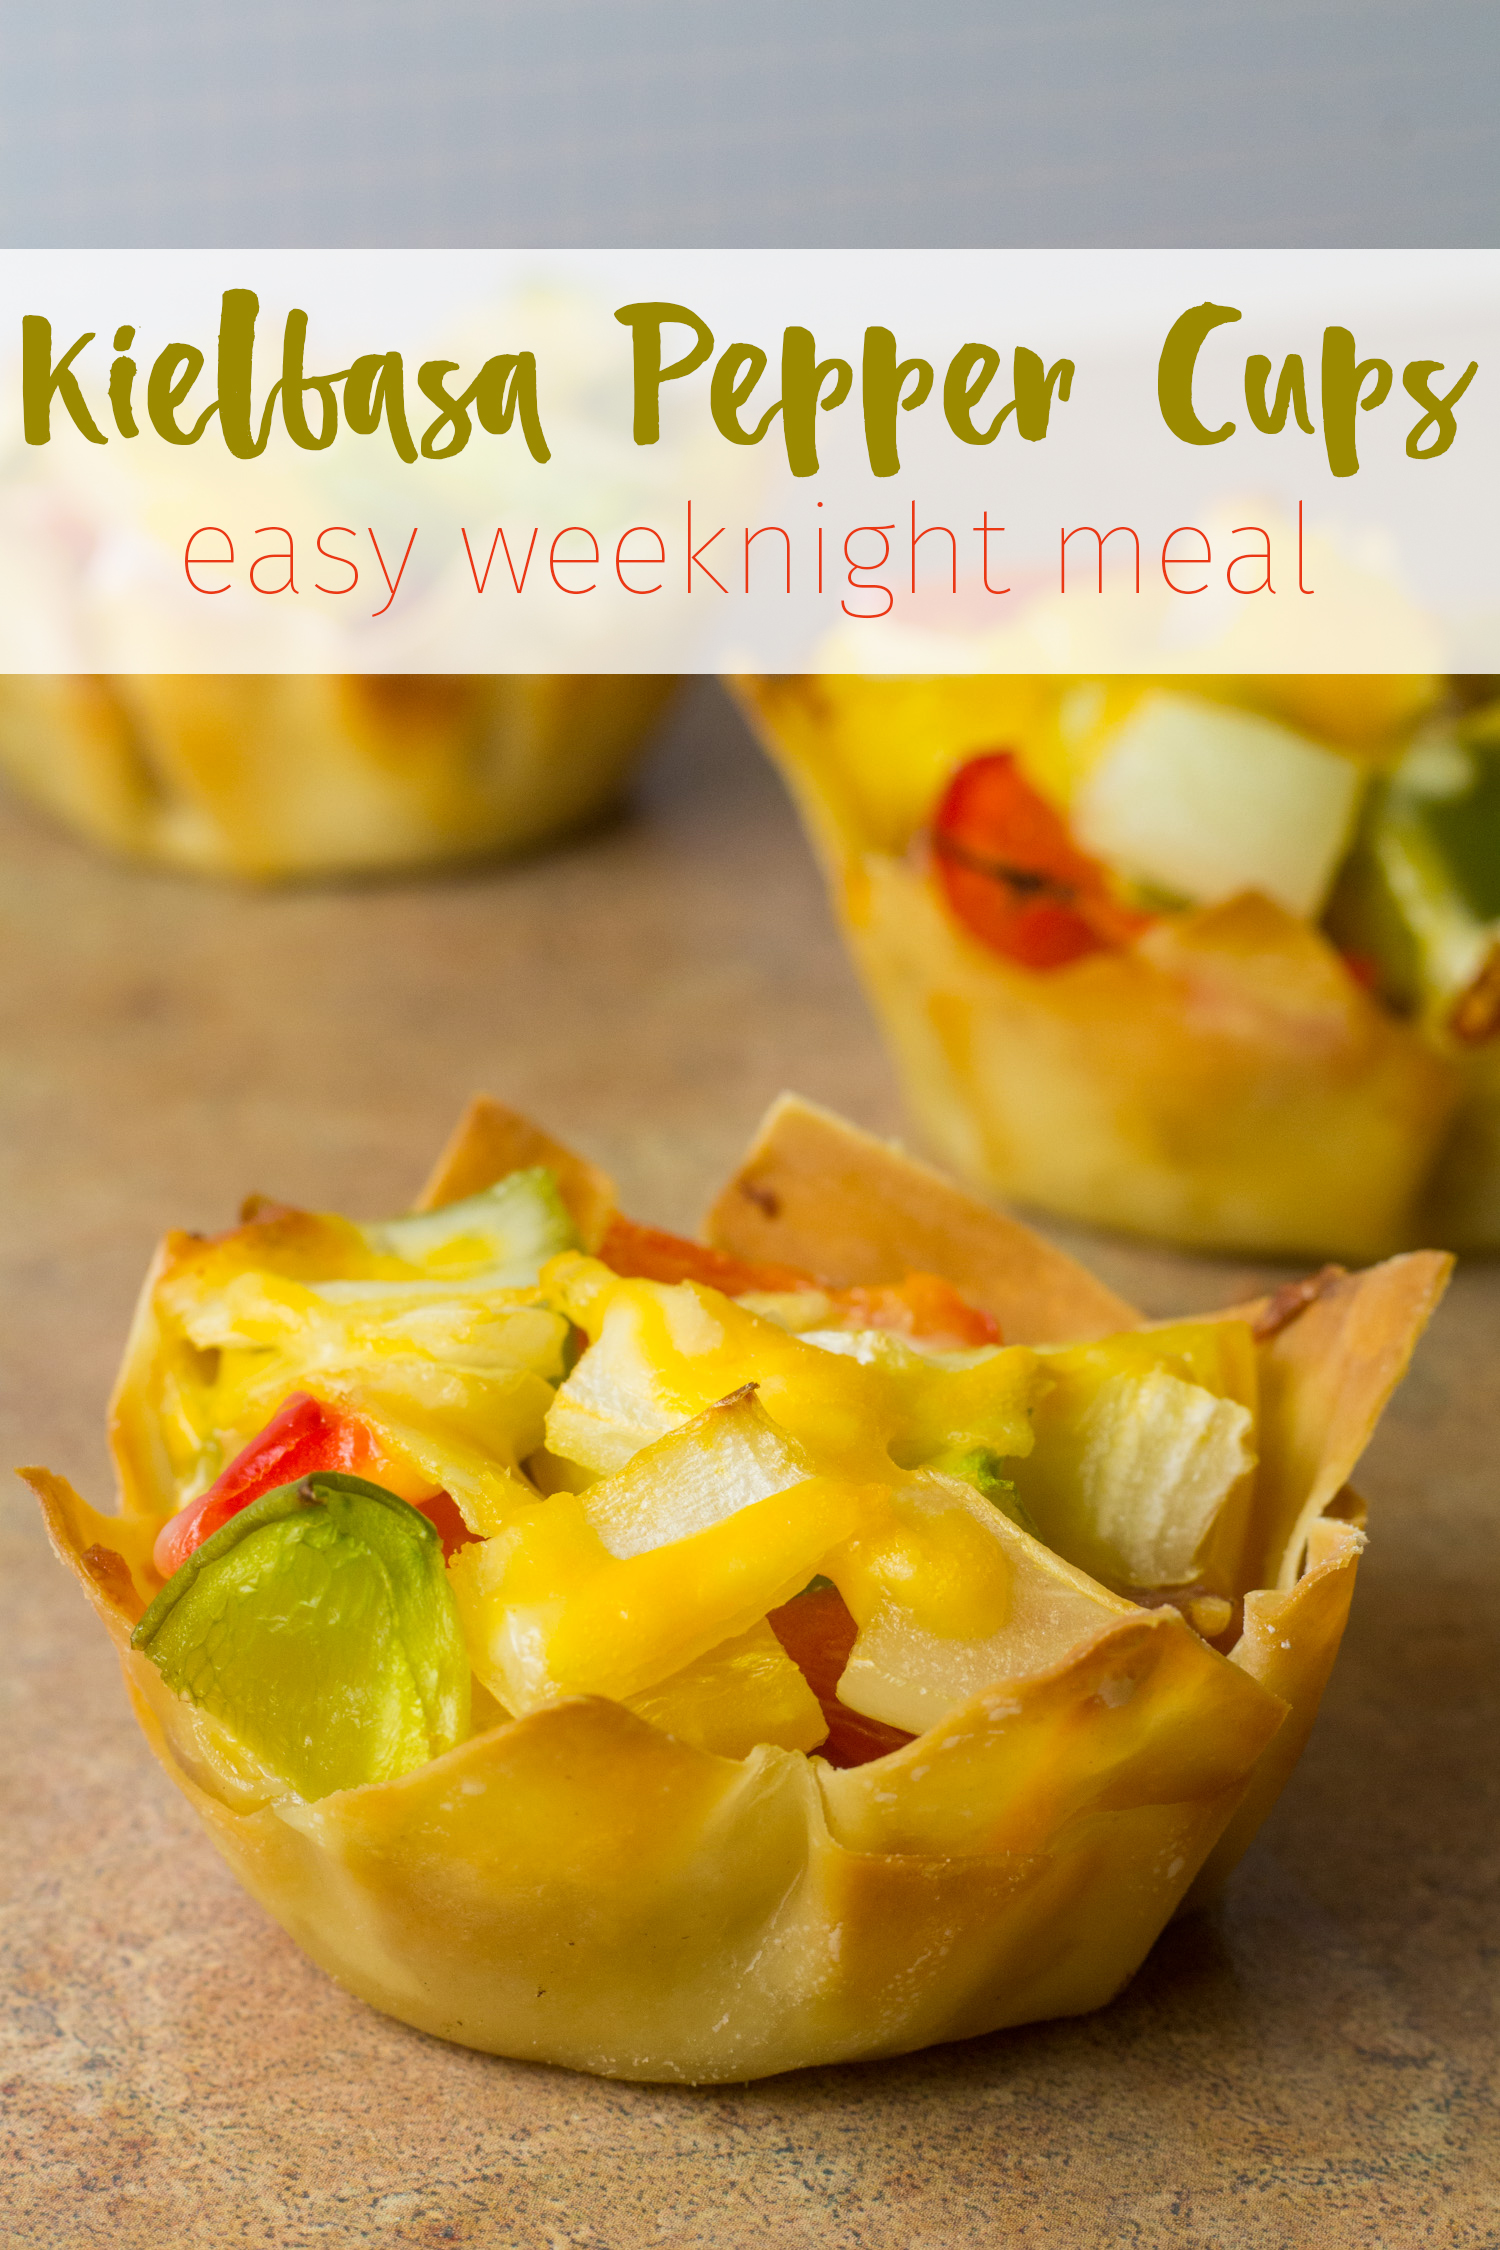 Looking for an easy, delicious weeknight meal that can also double as a stunning appetizer for your next party? These Kielbasa Pepper Cups fit the bill! They're SO easy to make, and packed with delicious filling like kielbasa and peppers. The best part? They take very little prep time! If you love kielbasa or polish sausage, you'll love these easy pepper cups!